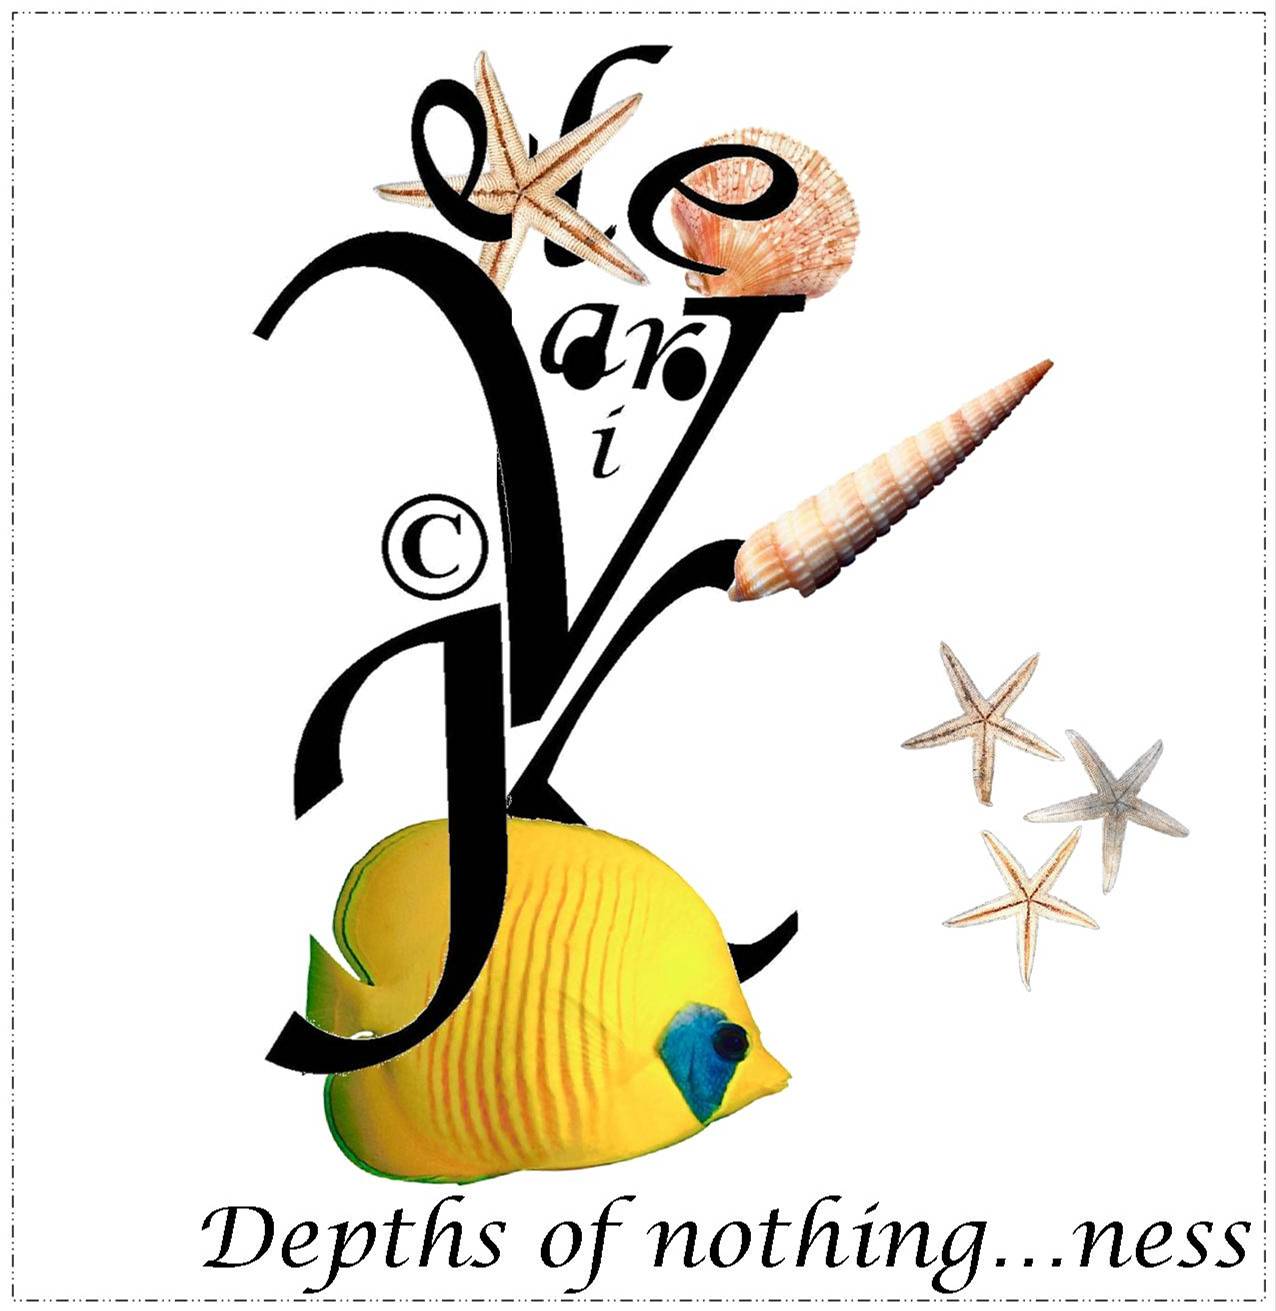 Depths of nothing...ness